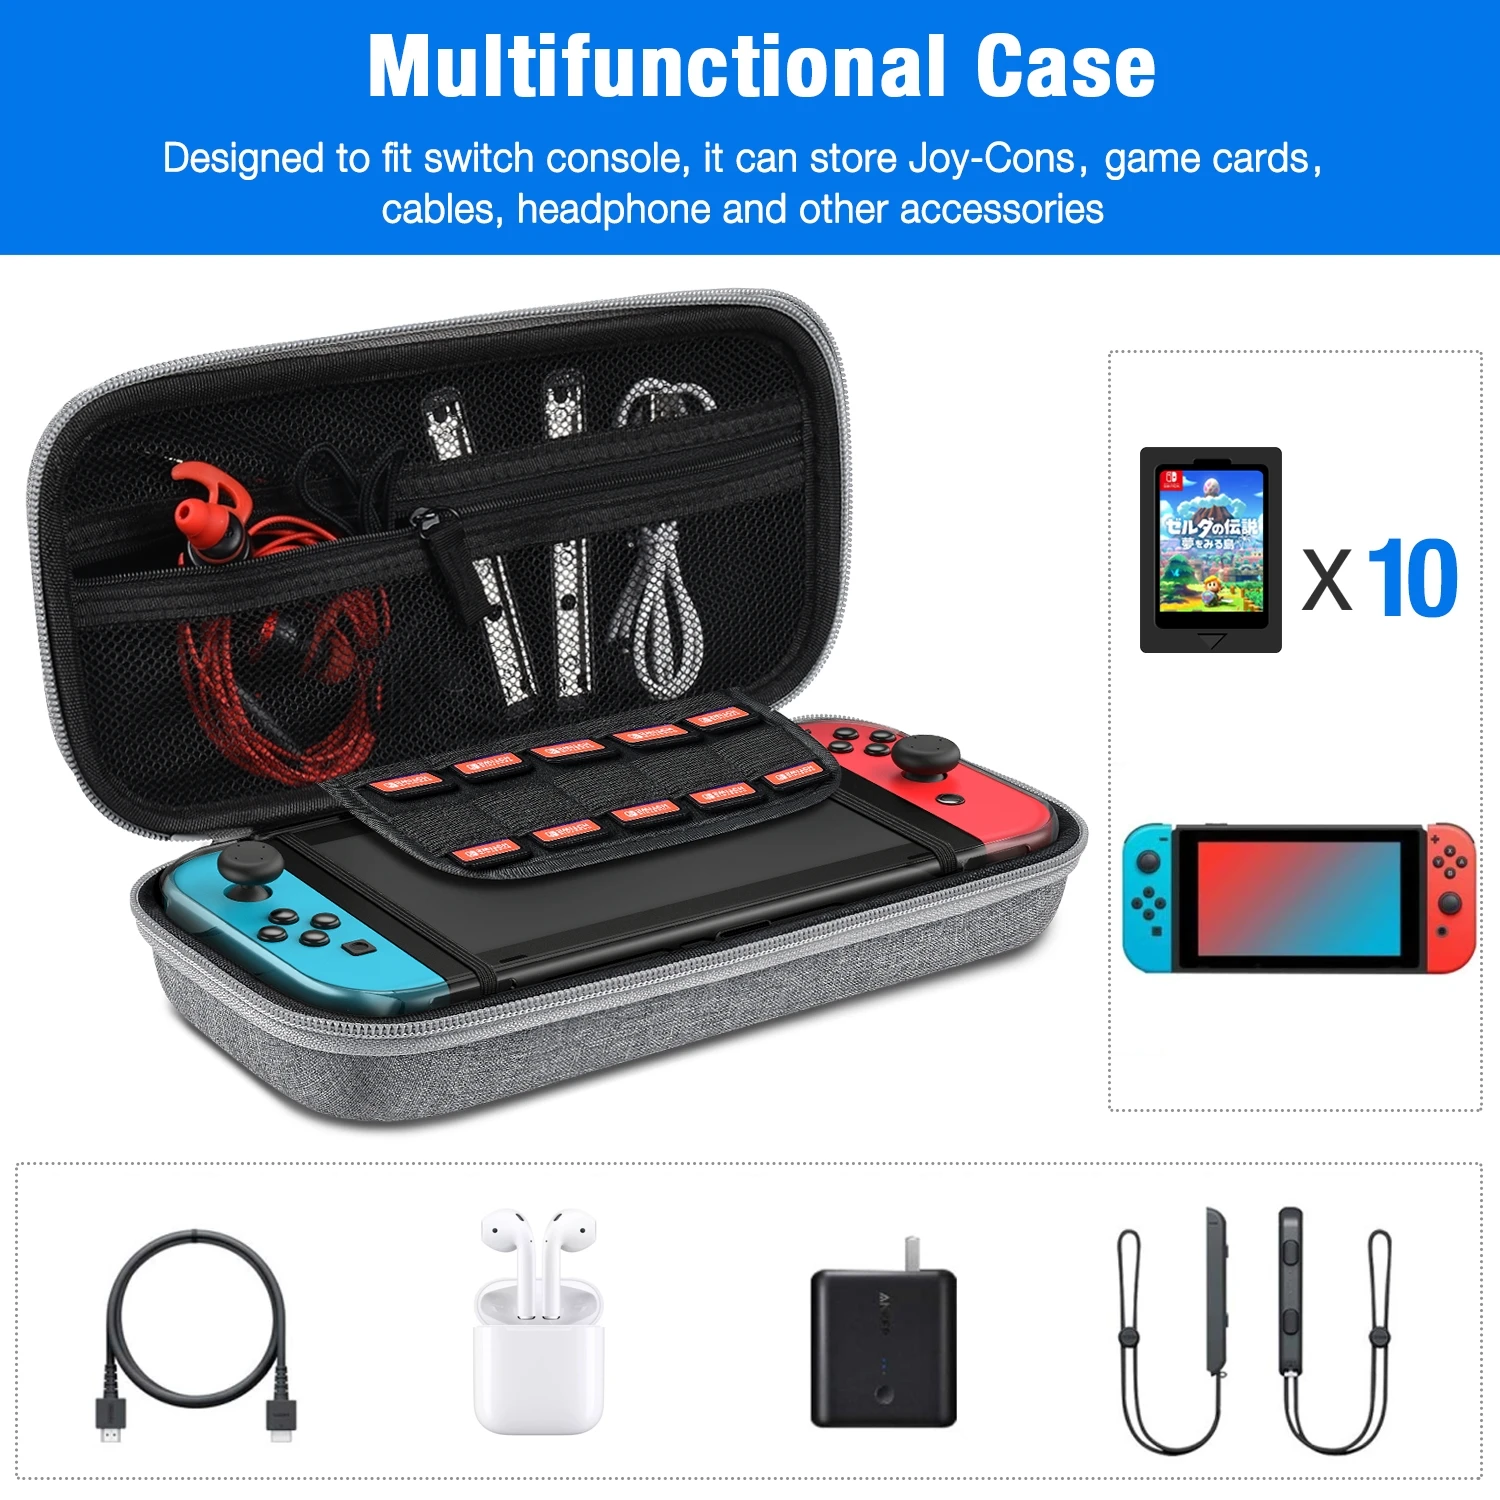 waterproof switch carrying case for nintendo switch case screen protector pouch to store console joycons cards and accessories free global shipping